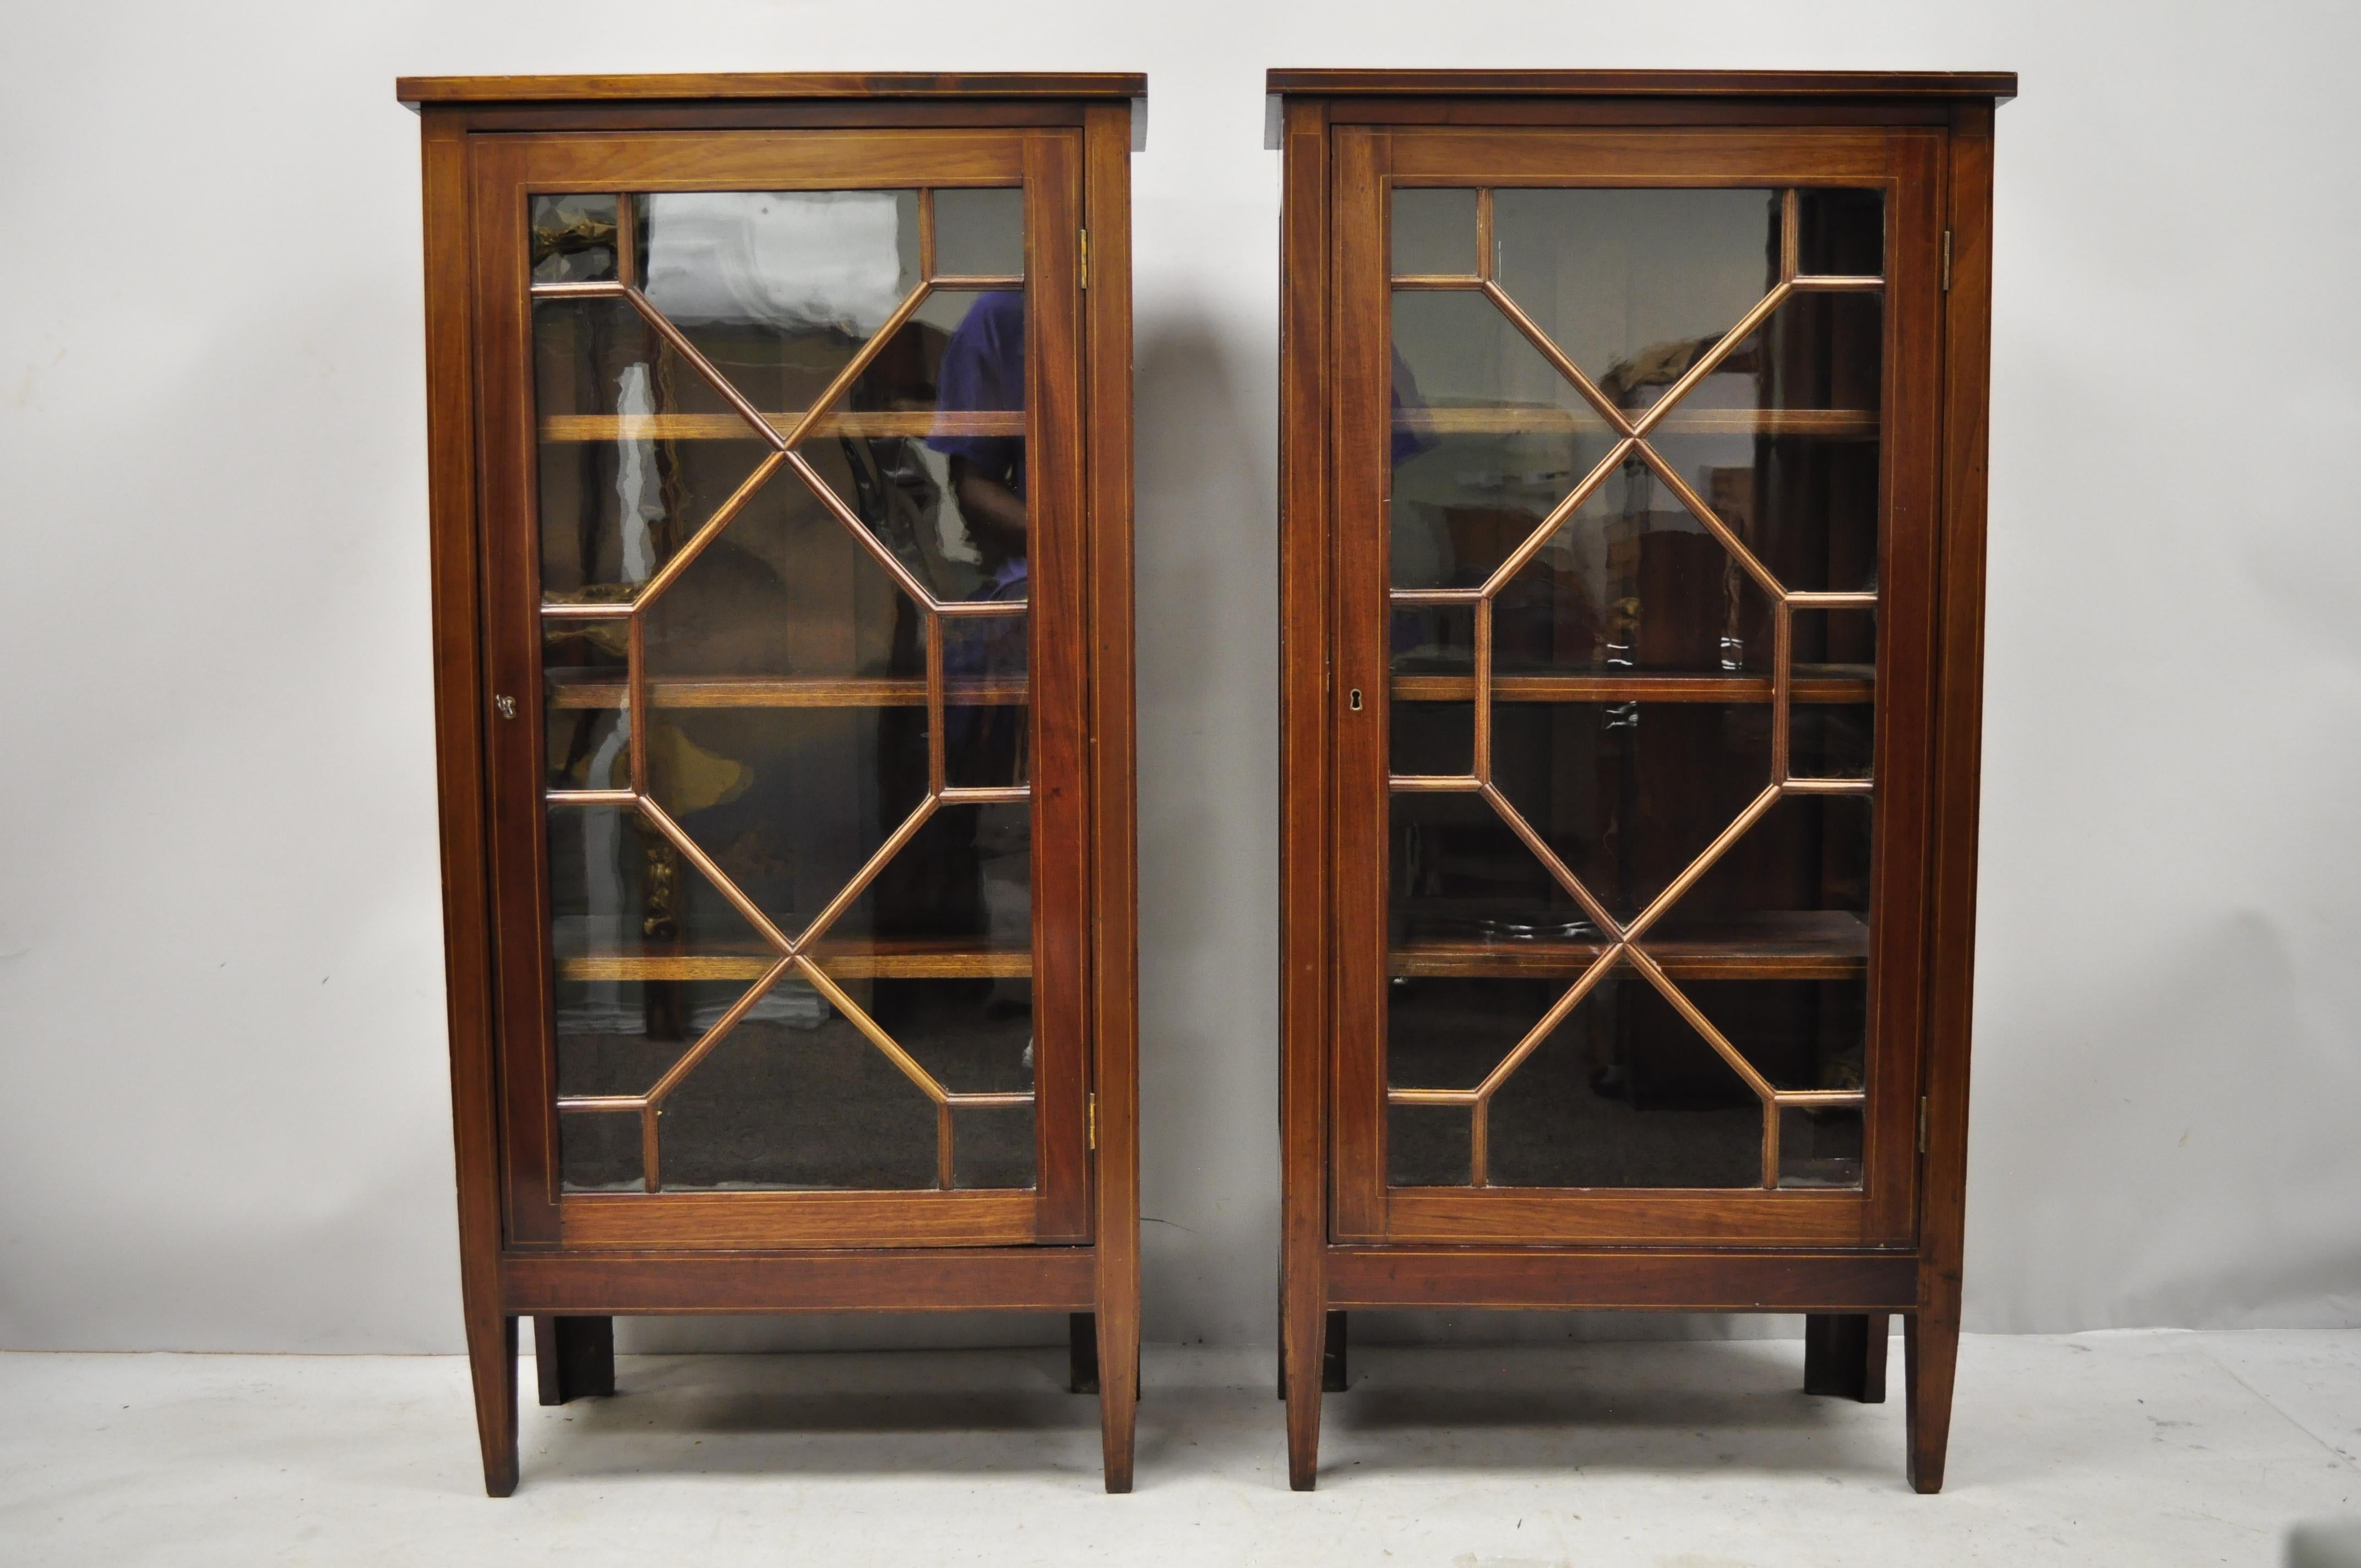 Pair of Crotch Mahogany Inlaid Edwardian Glass Display Cabinet Curio Bookcases 6